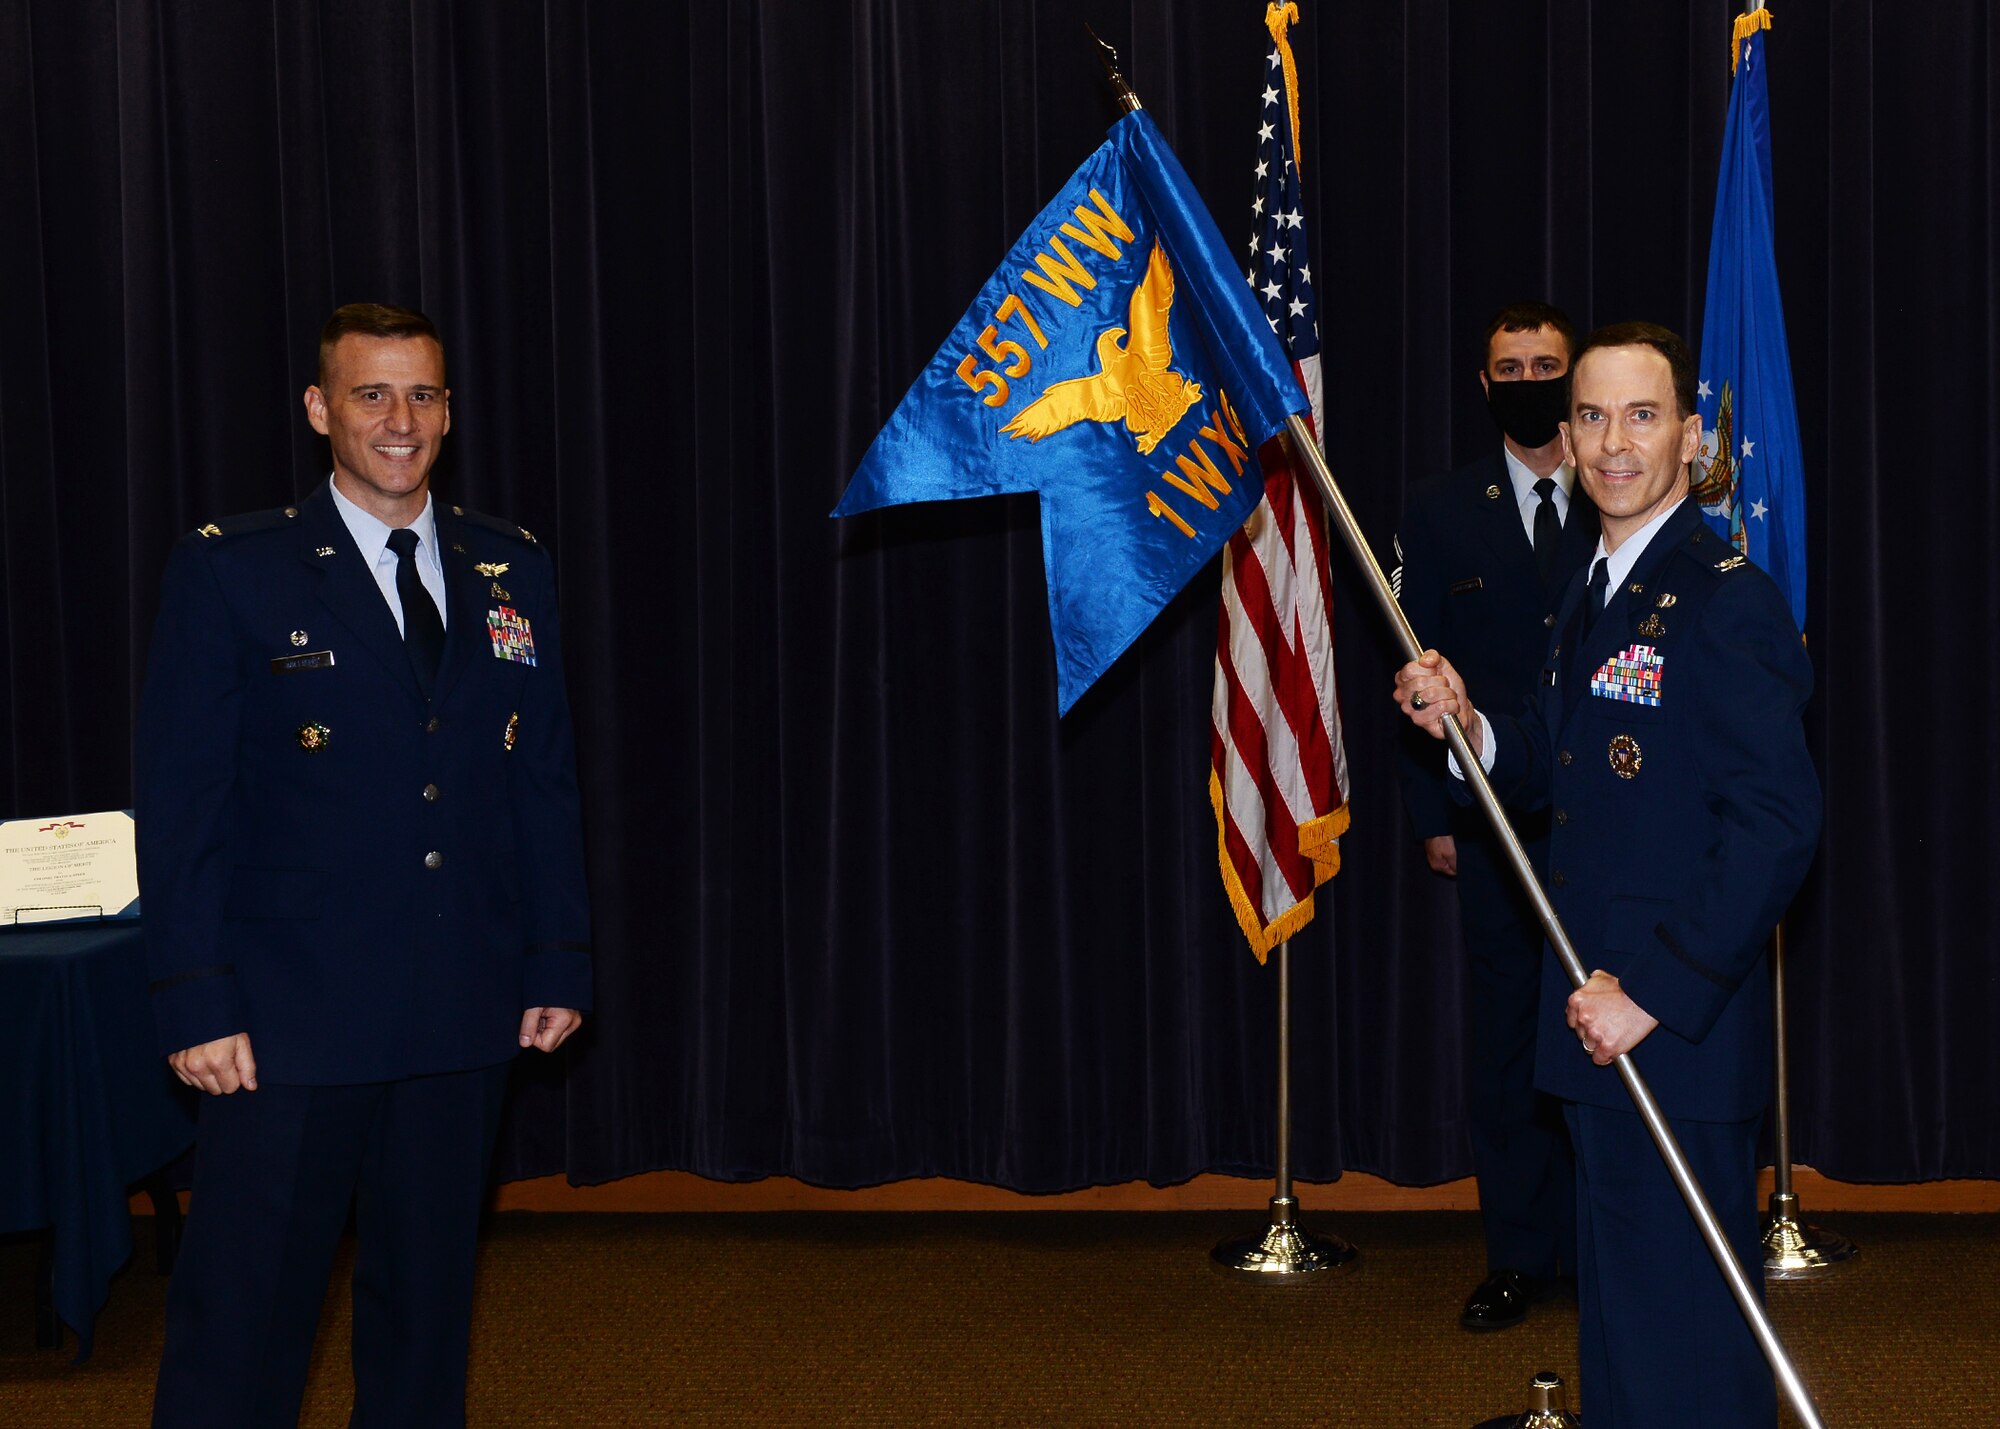 Col. Bradley Stebbins receives the guidon and assumed command of the 1st Weather Group in a socially-distanced ceremony on June 24, 2020 in the Chief Master Sgt. Peter Moore auditorium on Offutt Air Force Base, Nebraska.